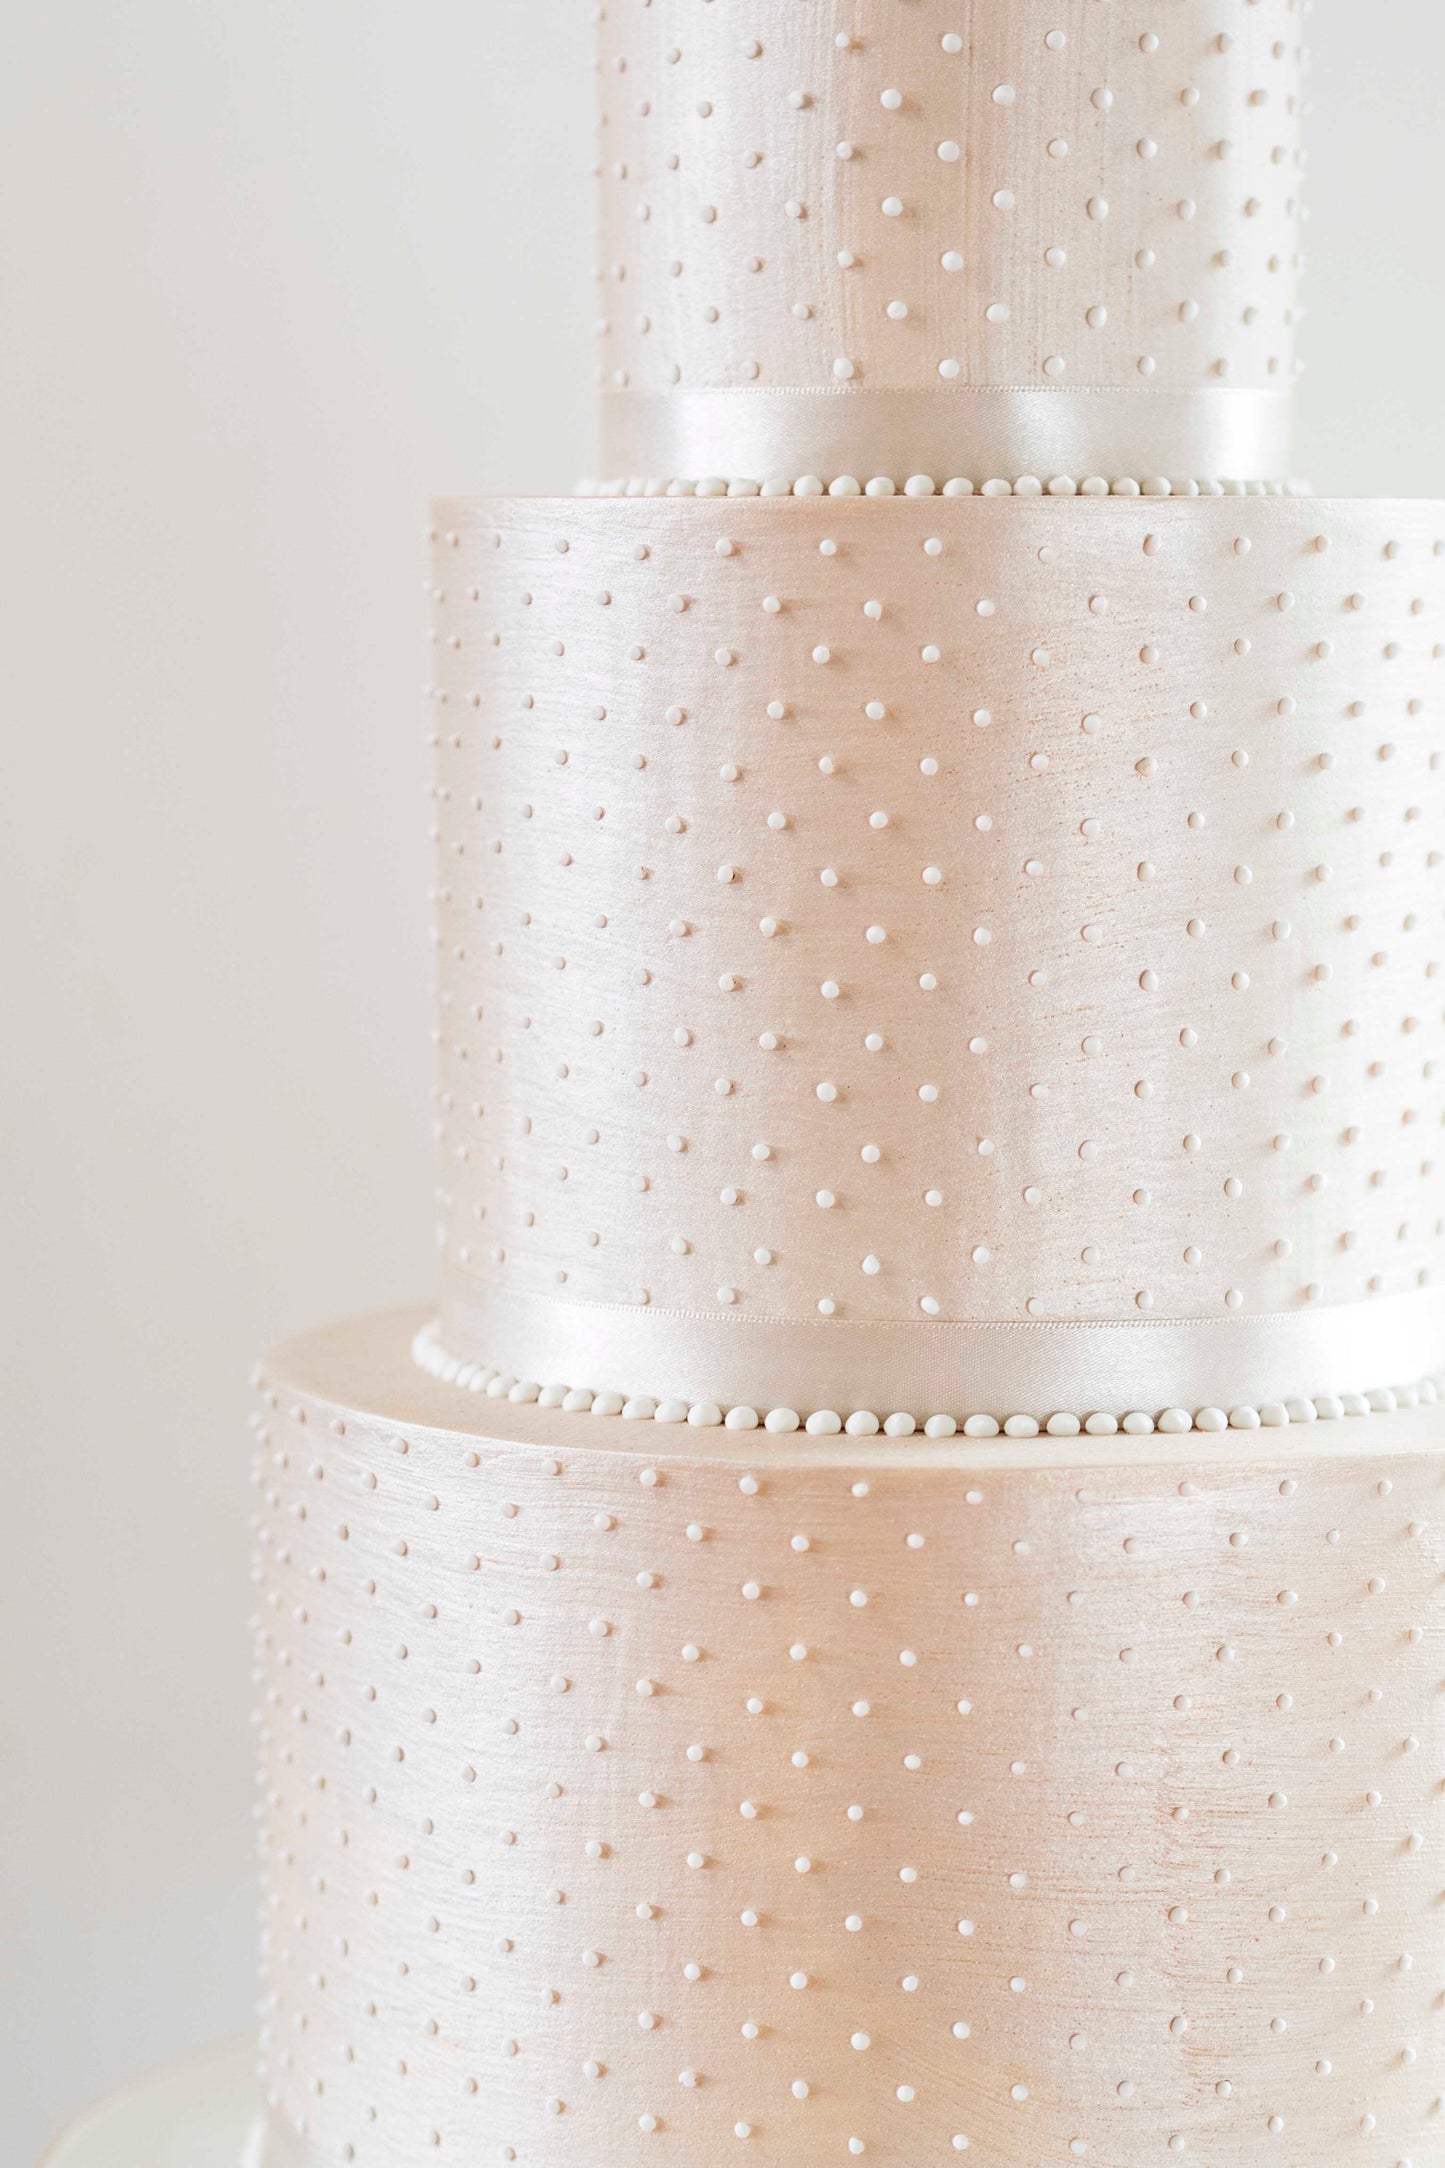 Champagne coloured, budget friendly deep tiered modern wedding cake in a simple classic design with sharp edges and piped pearls